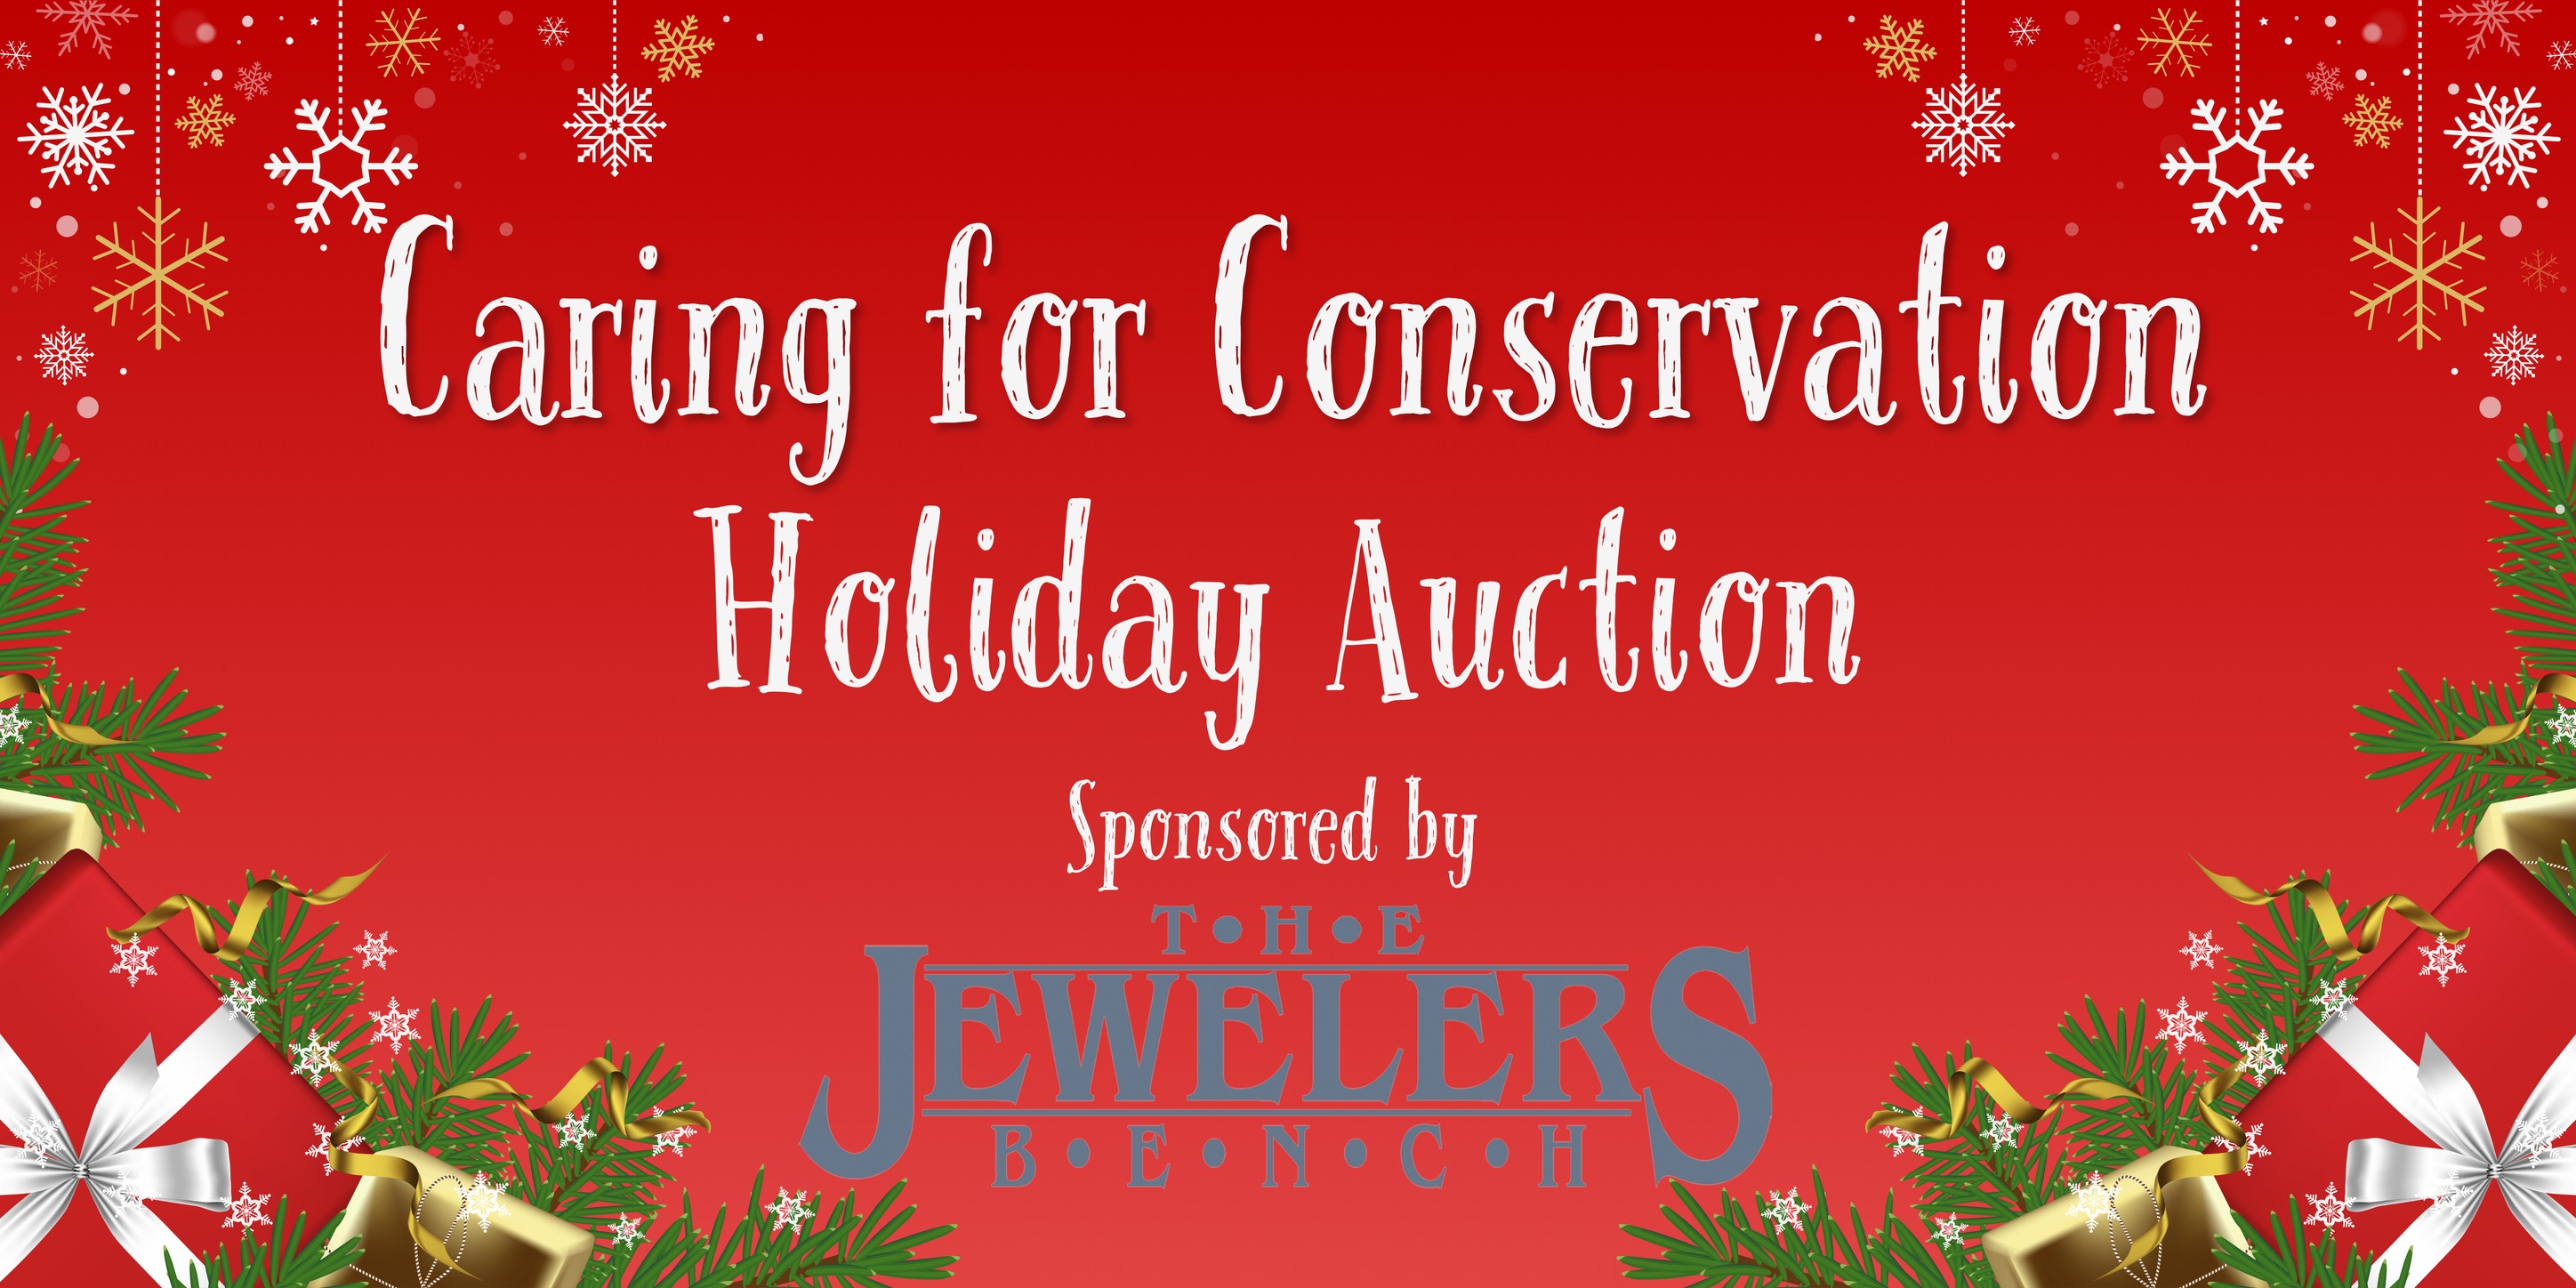 Event Promo Photo For Caring for Conservation Holiday Auction